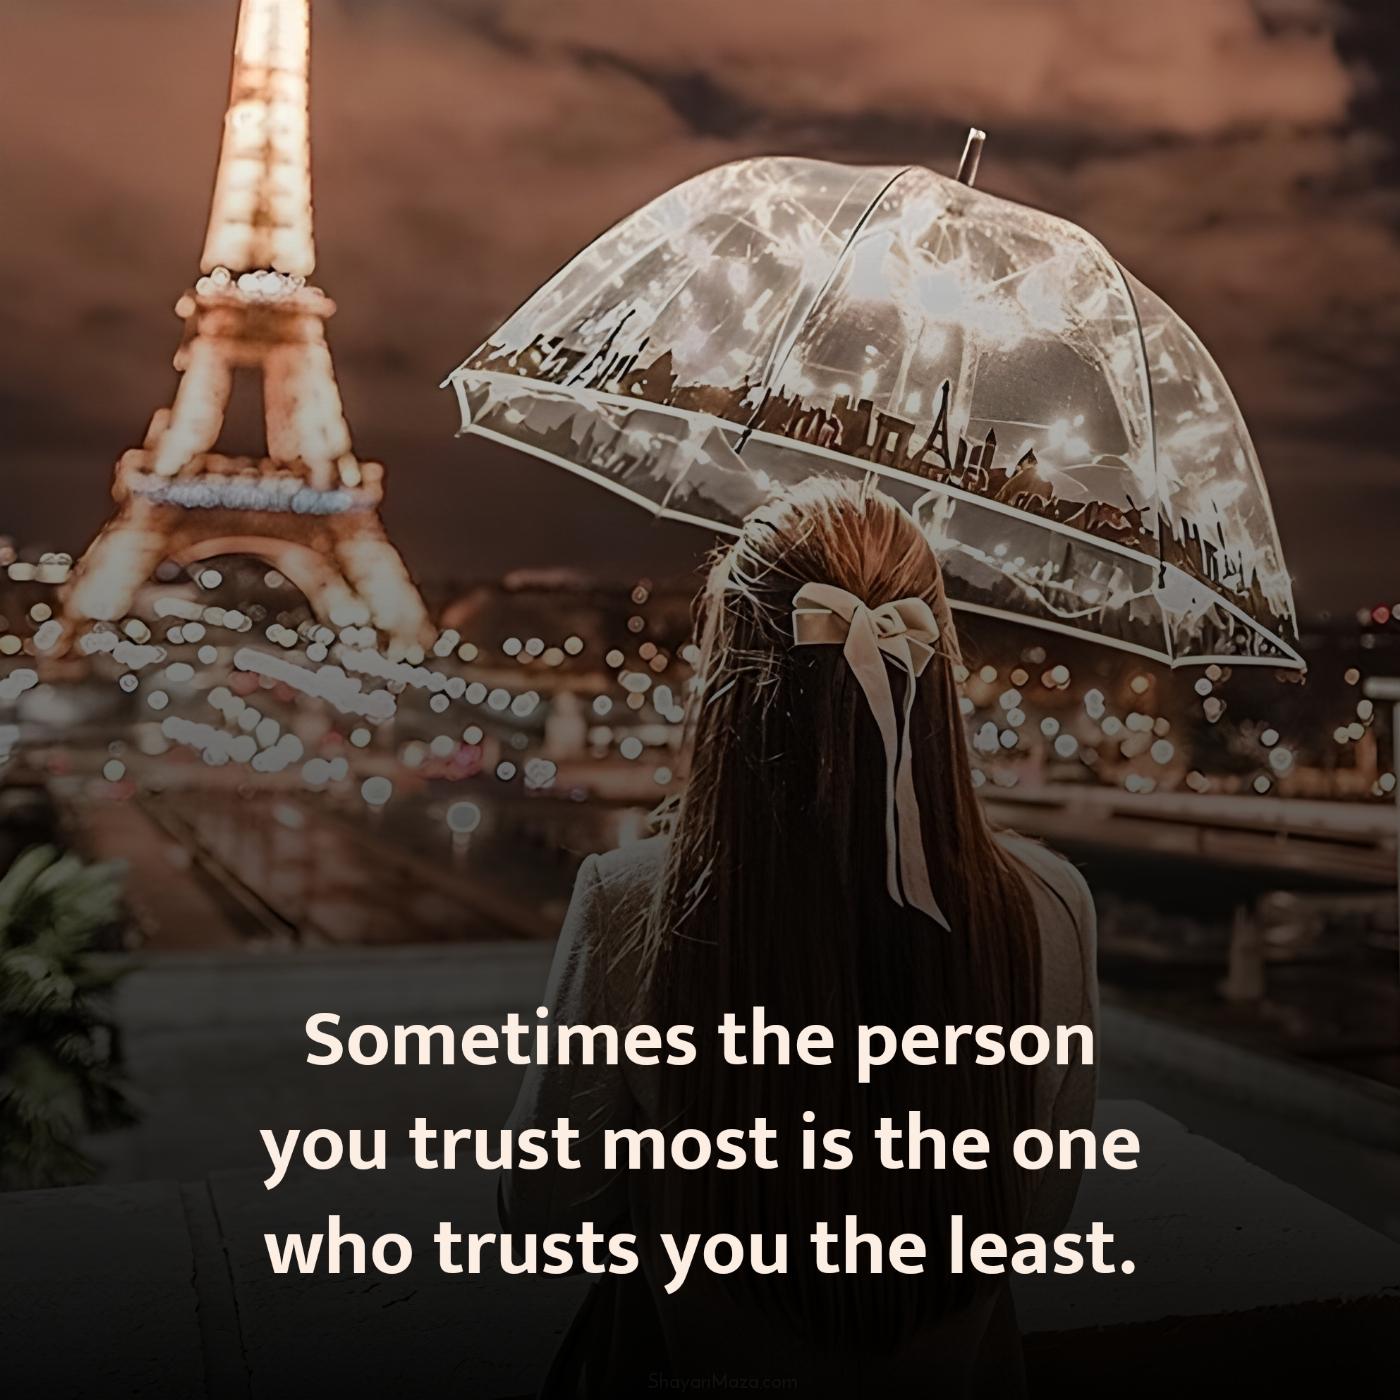 Sometimes the person you trust most is the one who trusts you